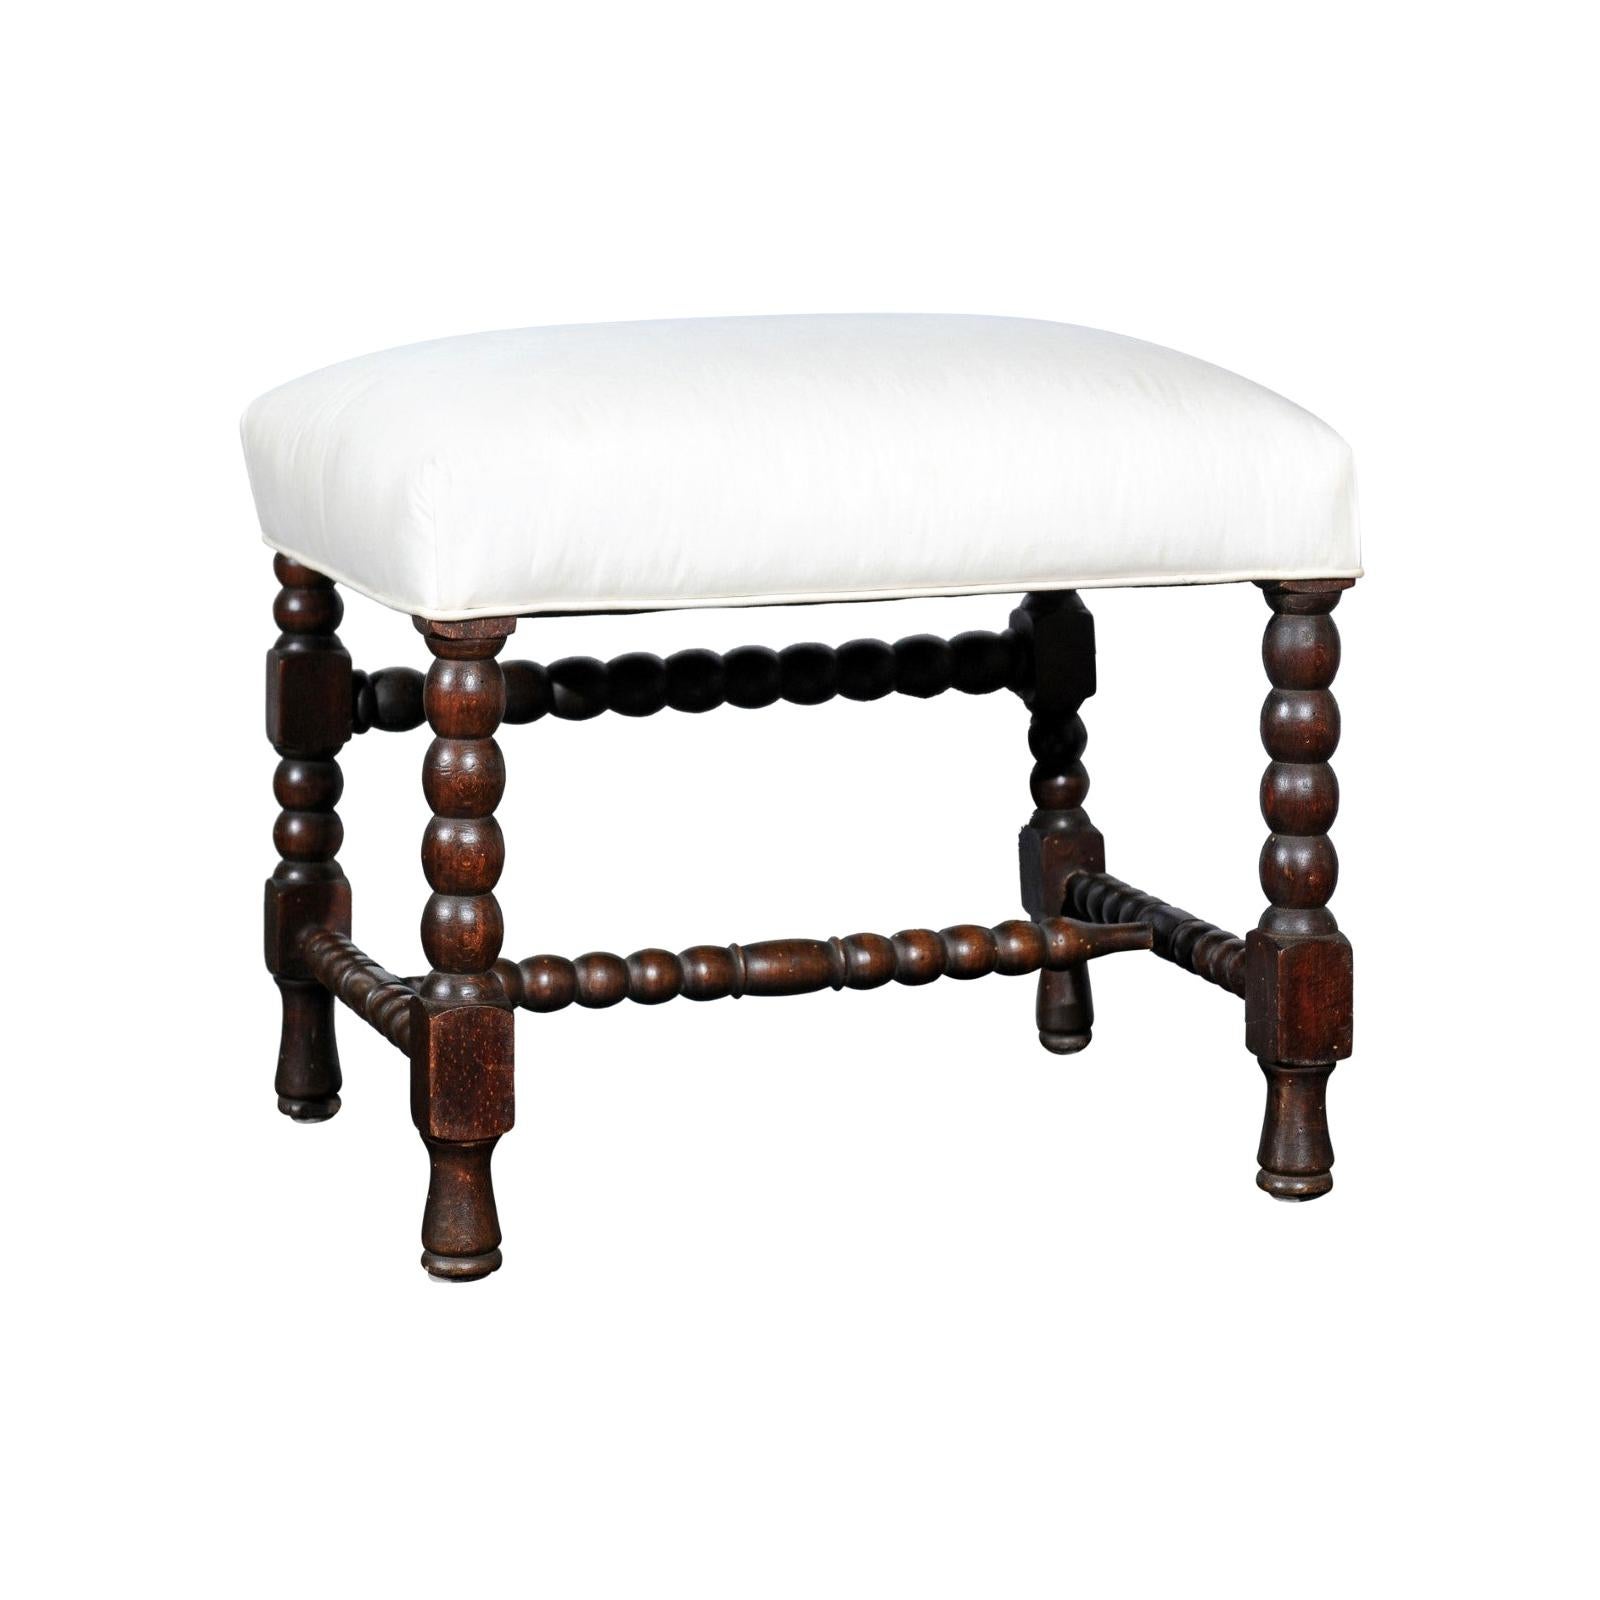 English Turn of the Century Oak Stool with Bobbin Legs and H-Form Stretcher